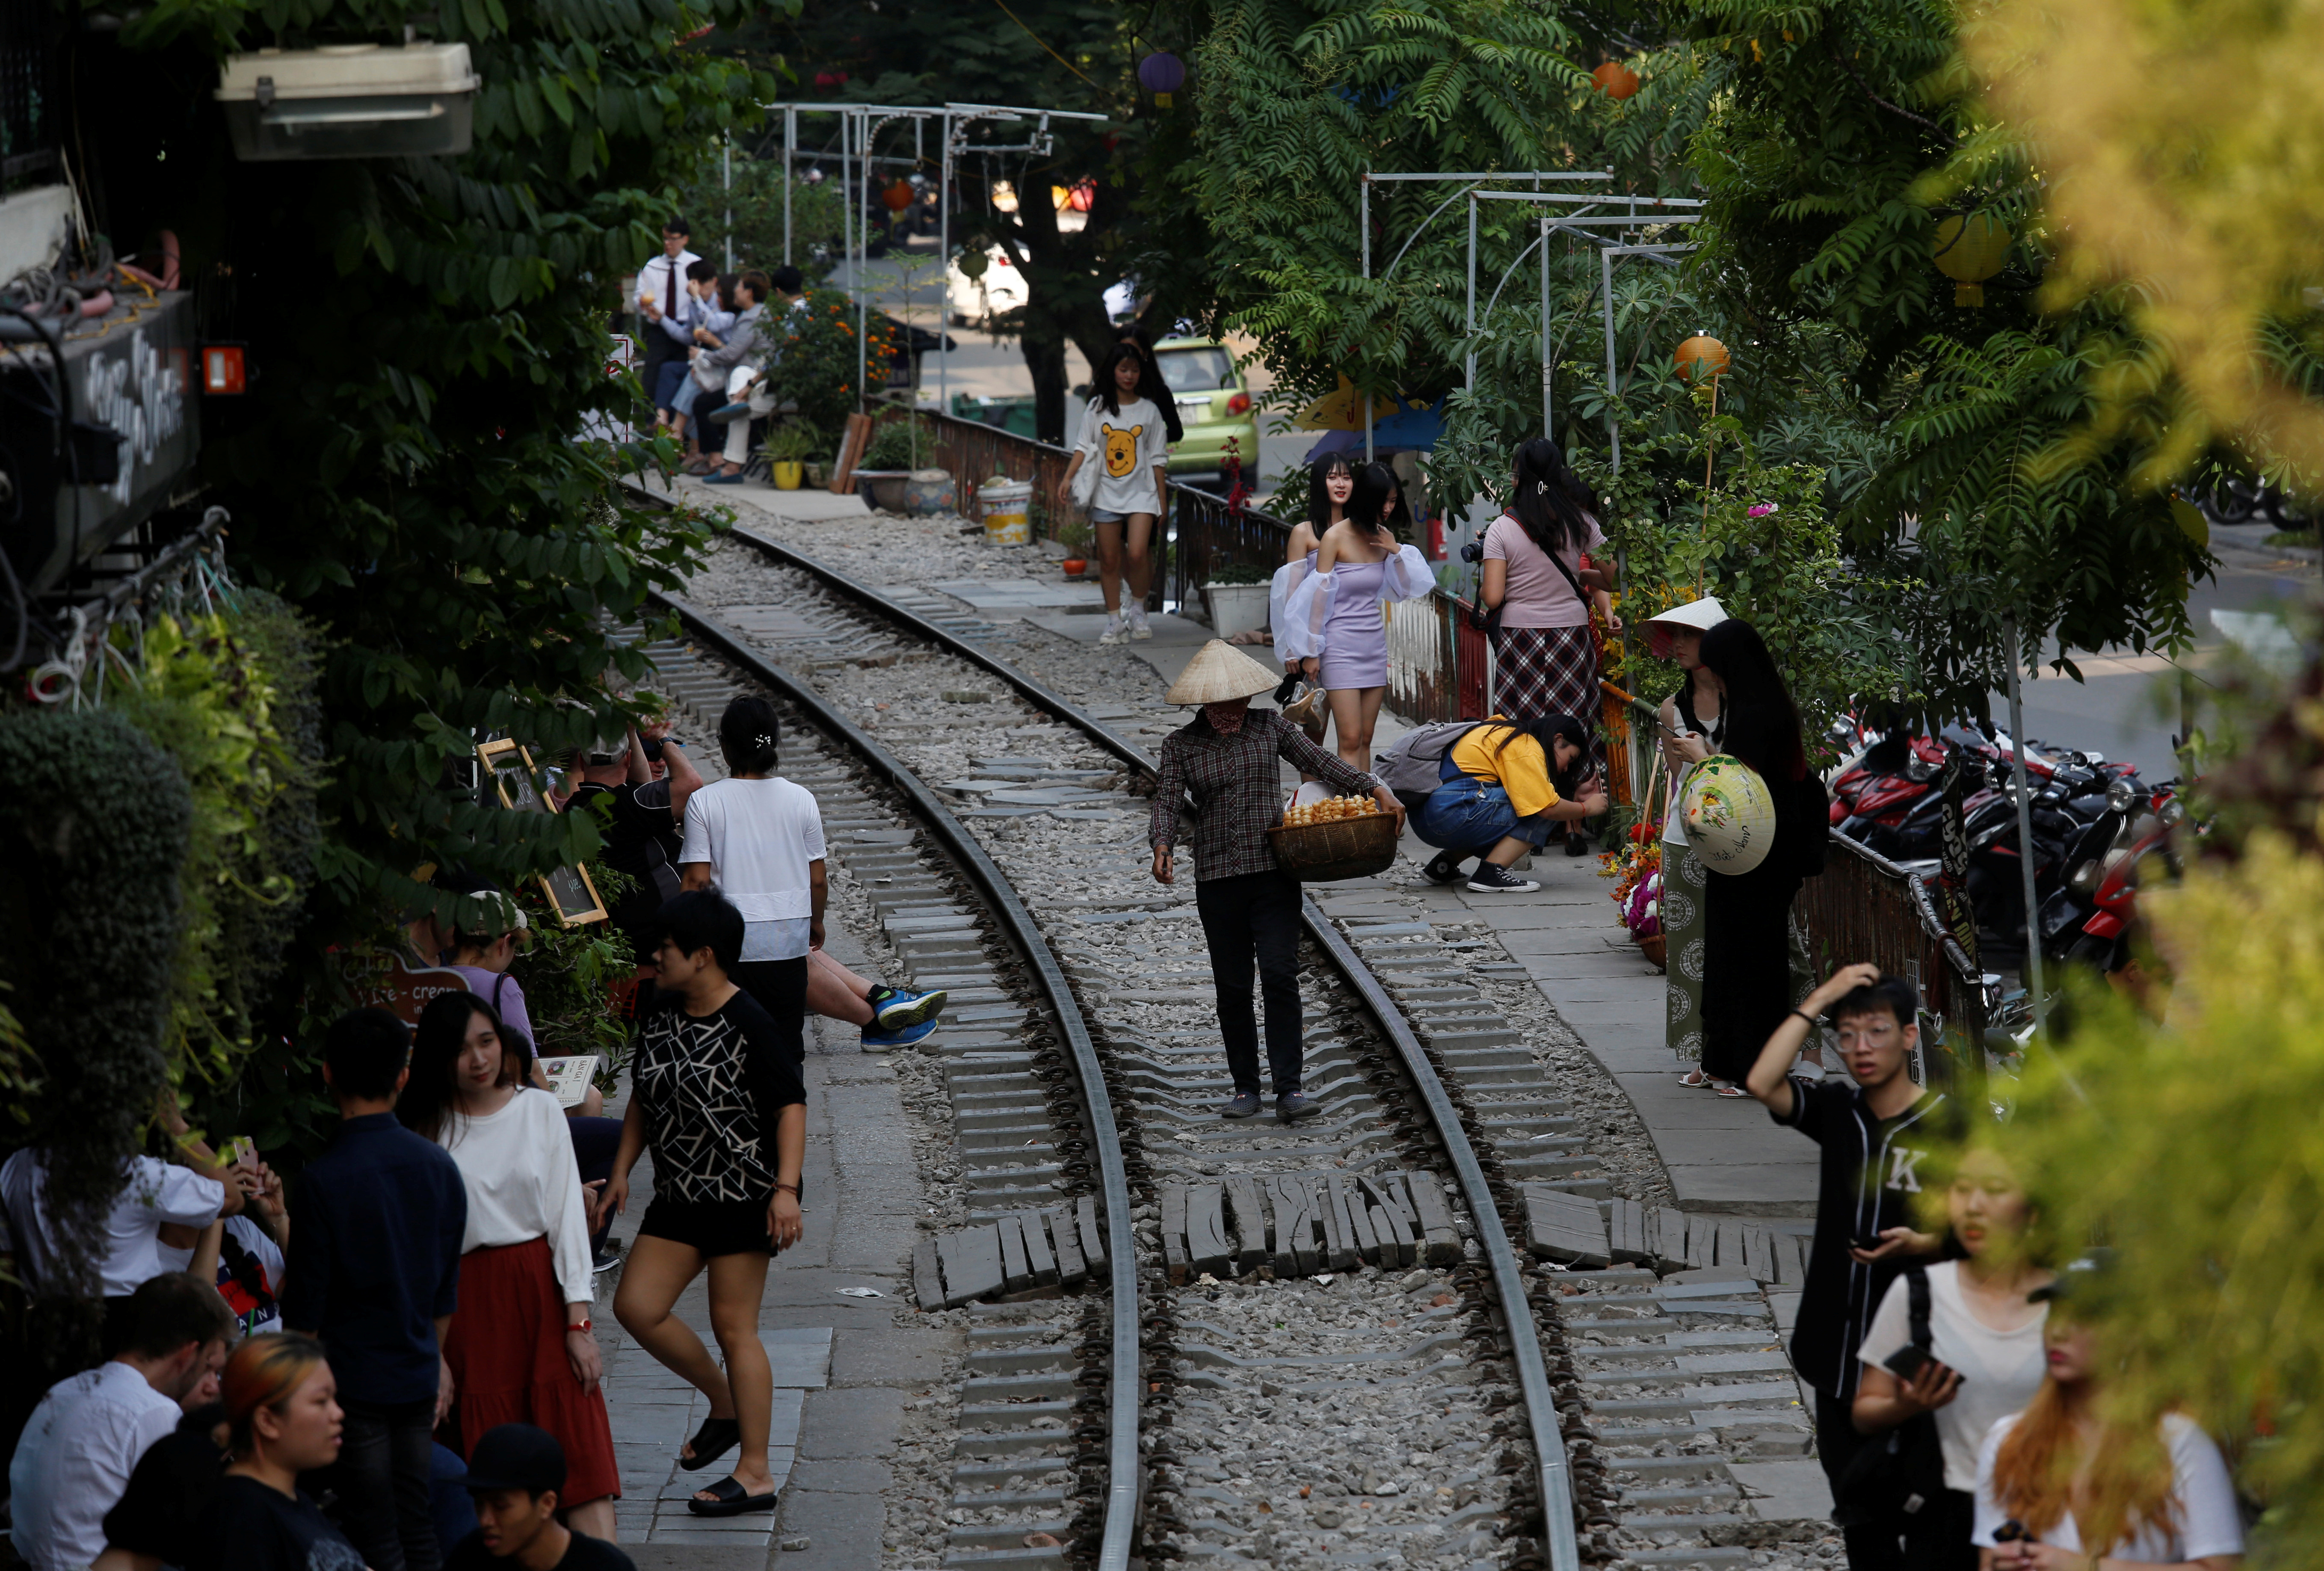 A vendor walks on a railway track as tourists gather on either side, in the Old Quarter of  Hanoi, Vietnam